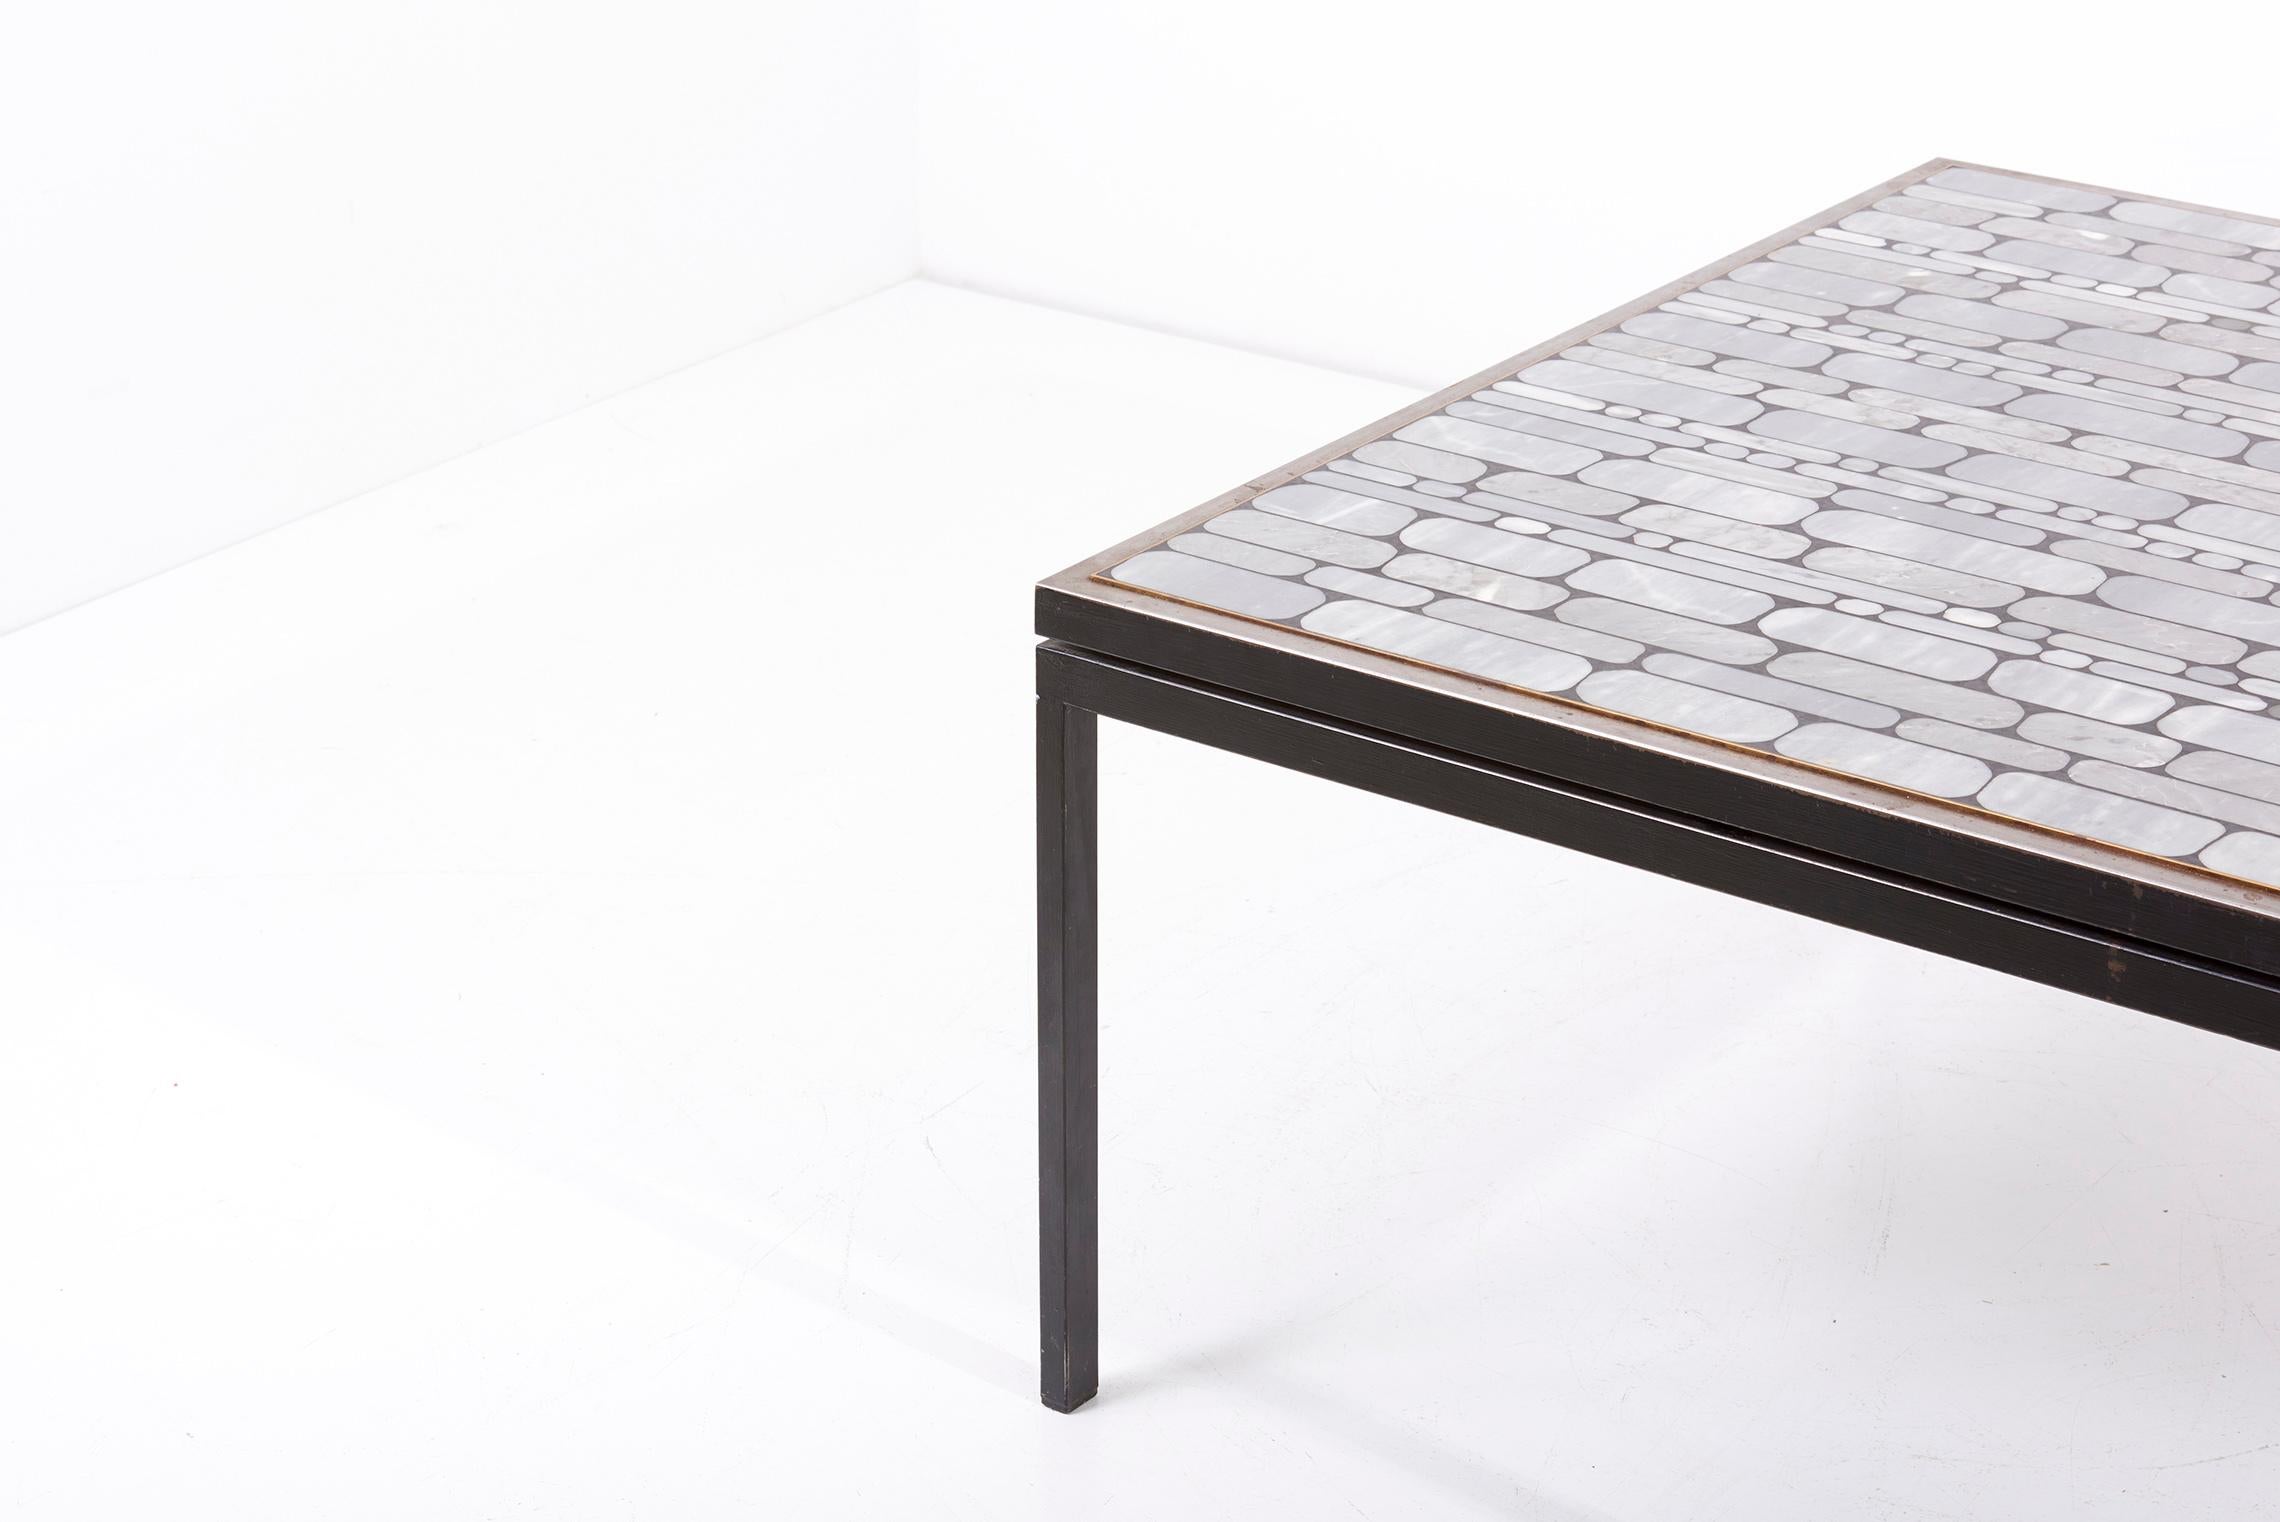 One of Kind Architectural Mosaic Coffee Table with Marble Inlays, Germany 1970s For Sale 2